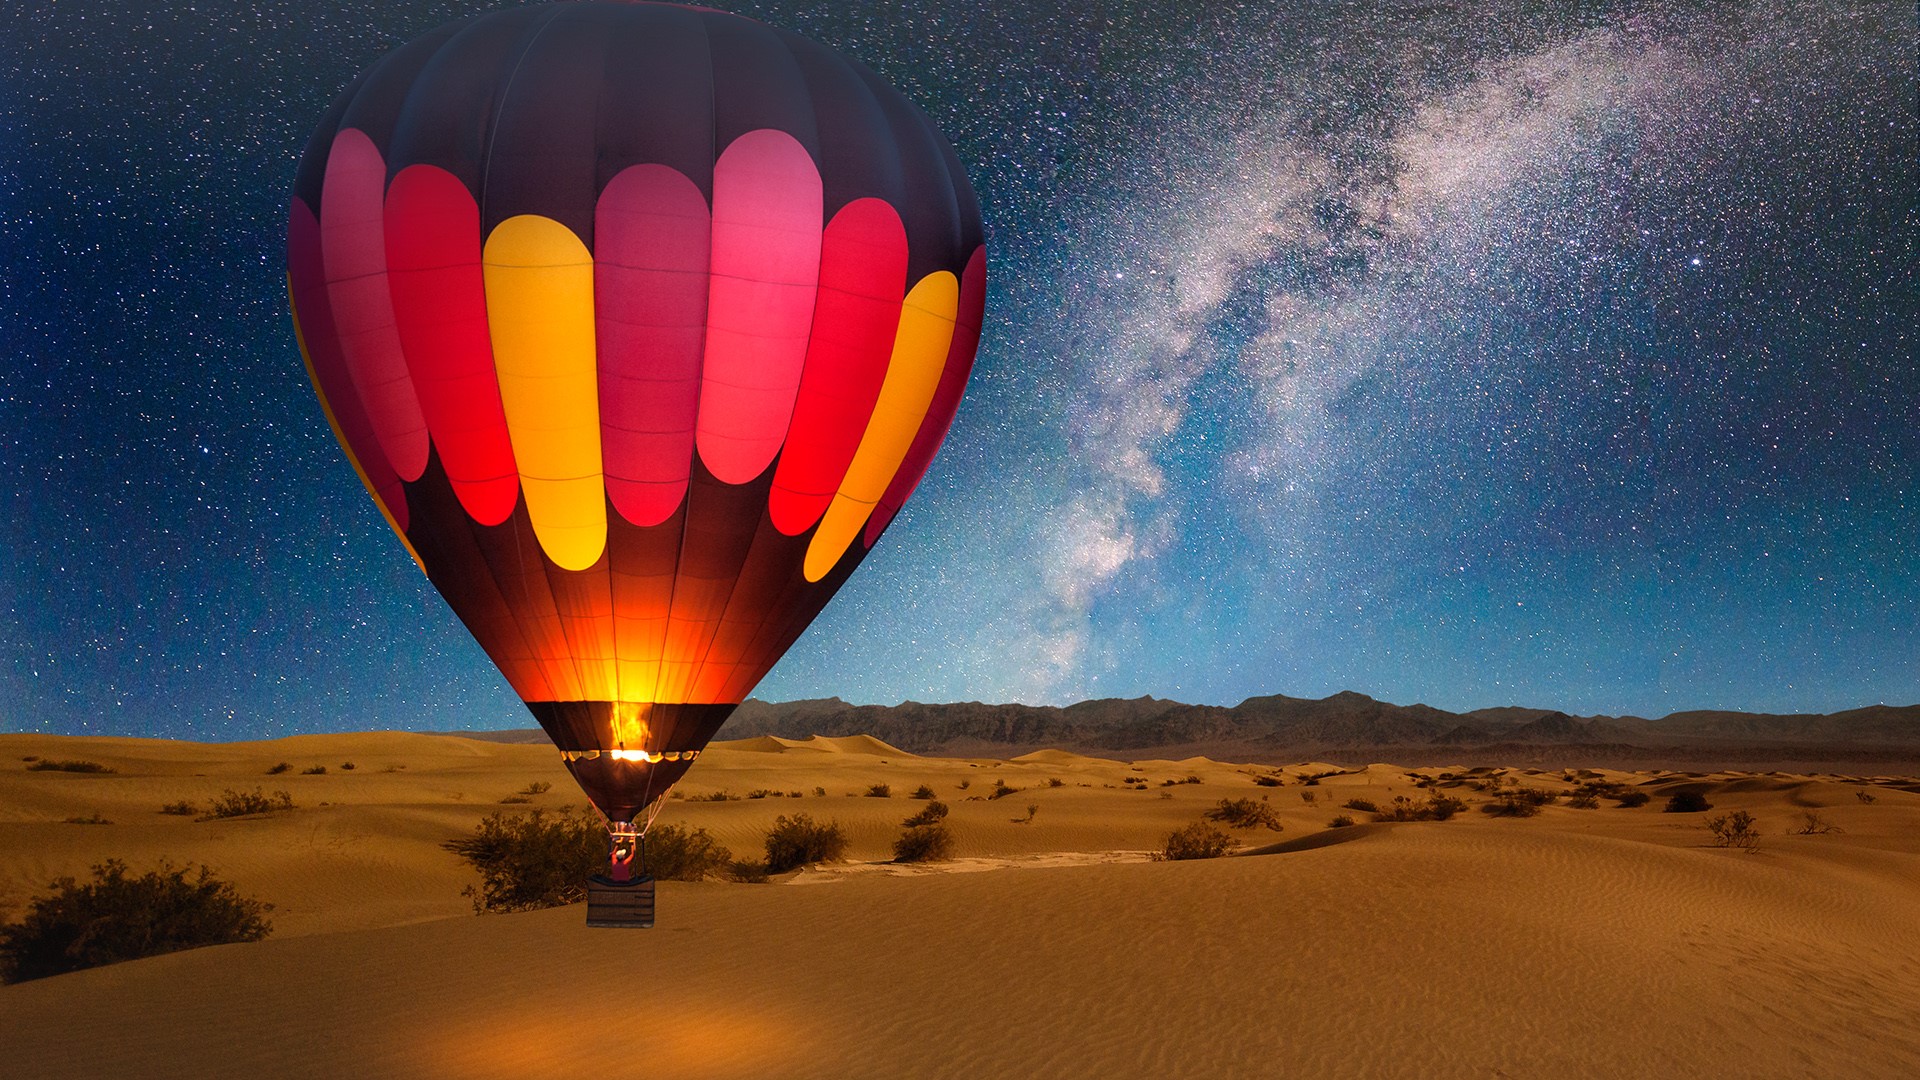 General 1920x1080 nature landscape hot air balloons sand plants stars night galaxy Milky Way dunes Death Valley California USA